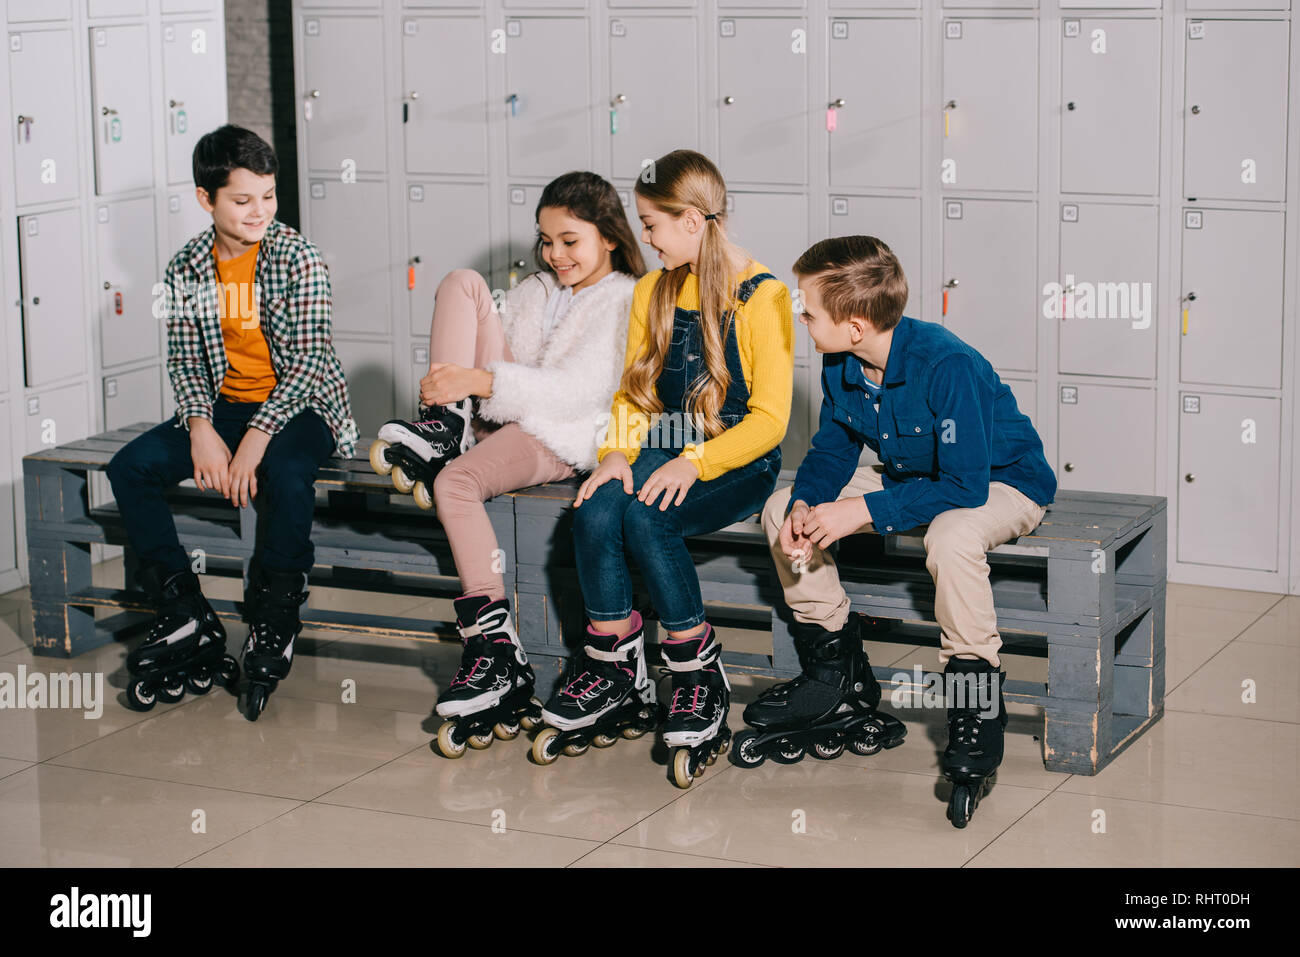 Group of kids in roller skates talking in changing room Stock Photo